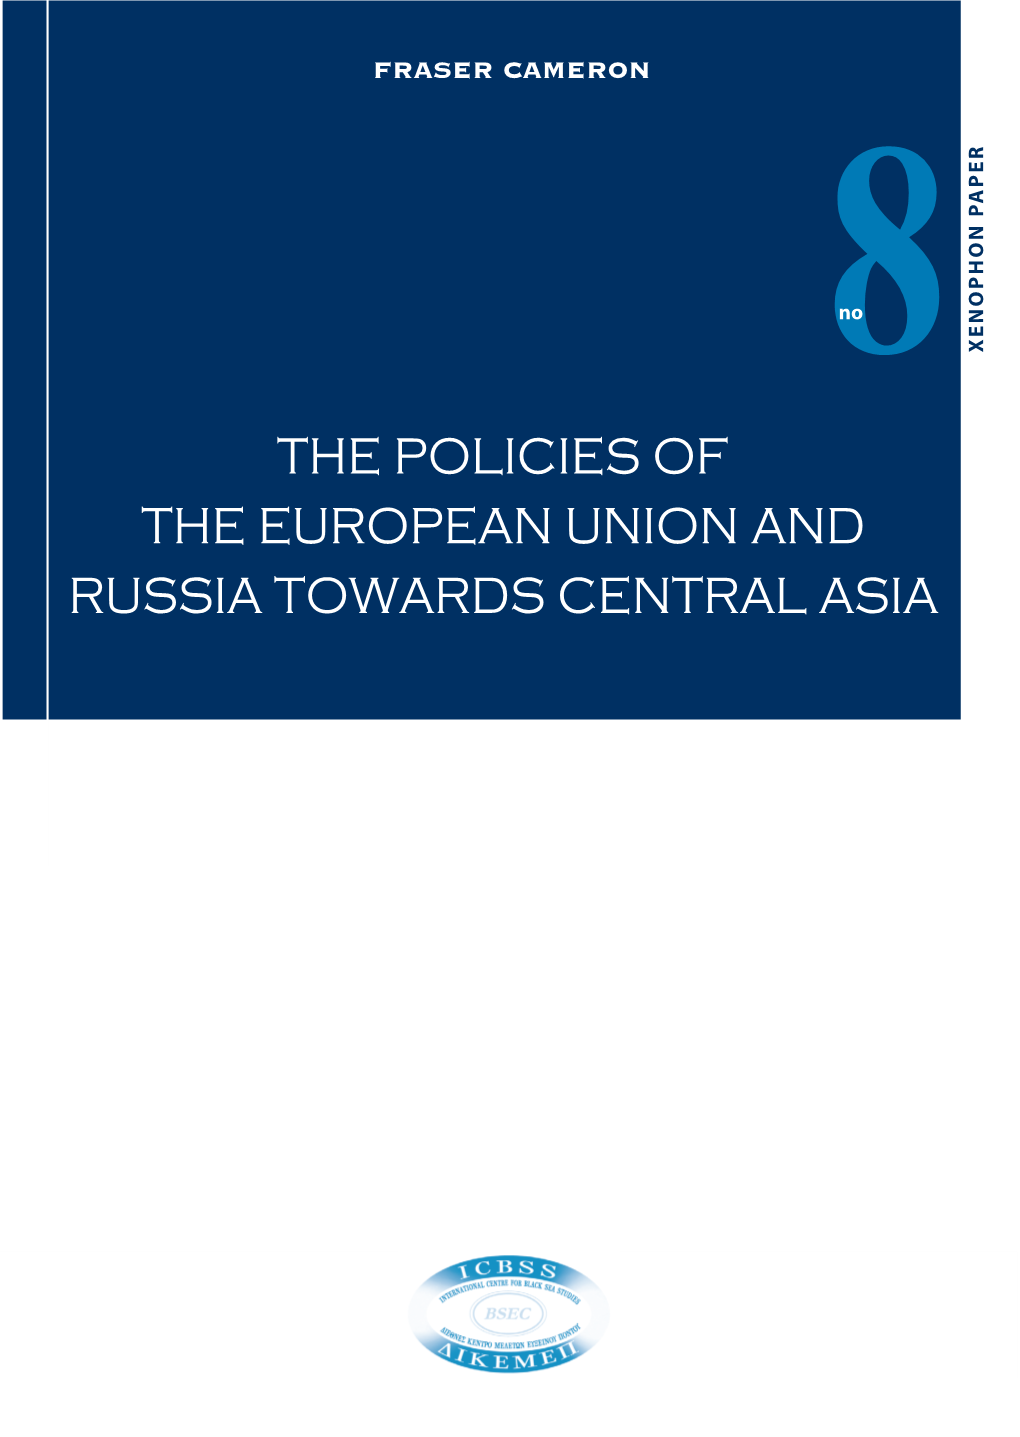 The Policies of the European Union and Russia Towards Central Asia